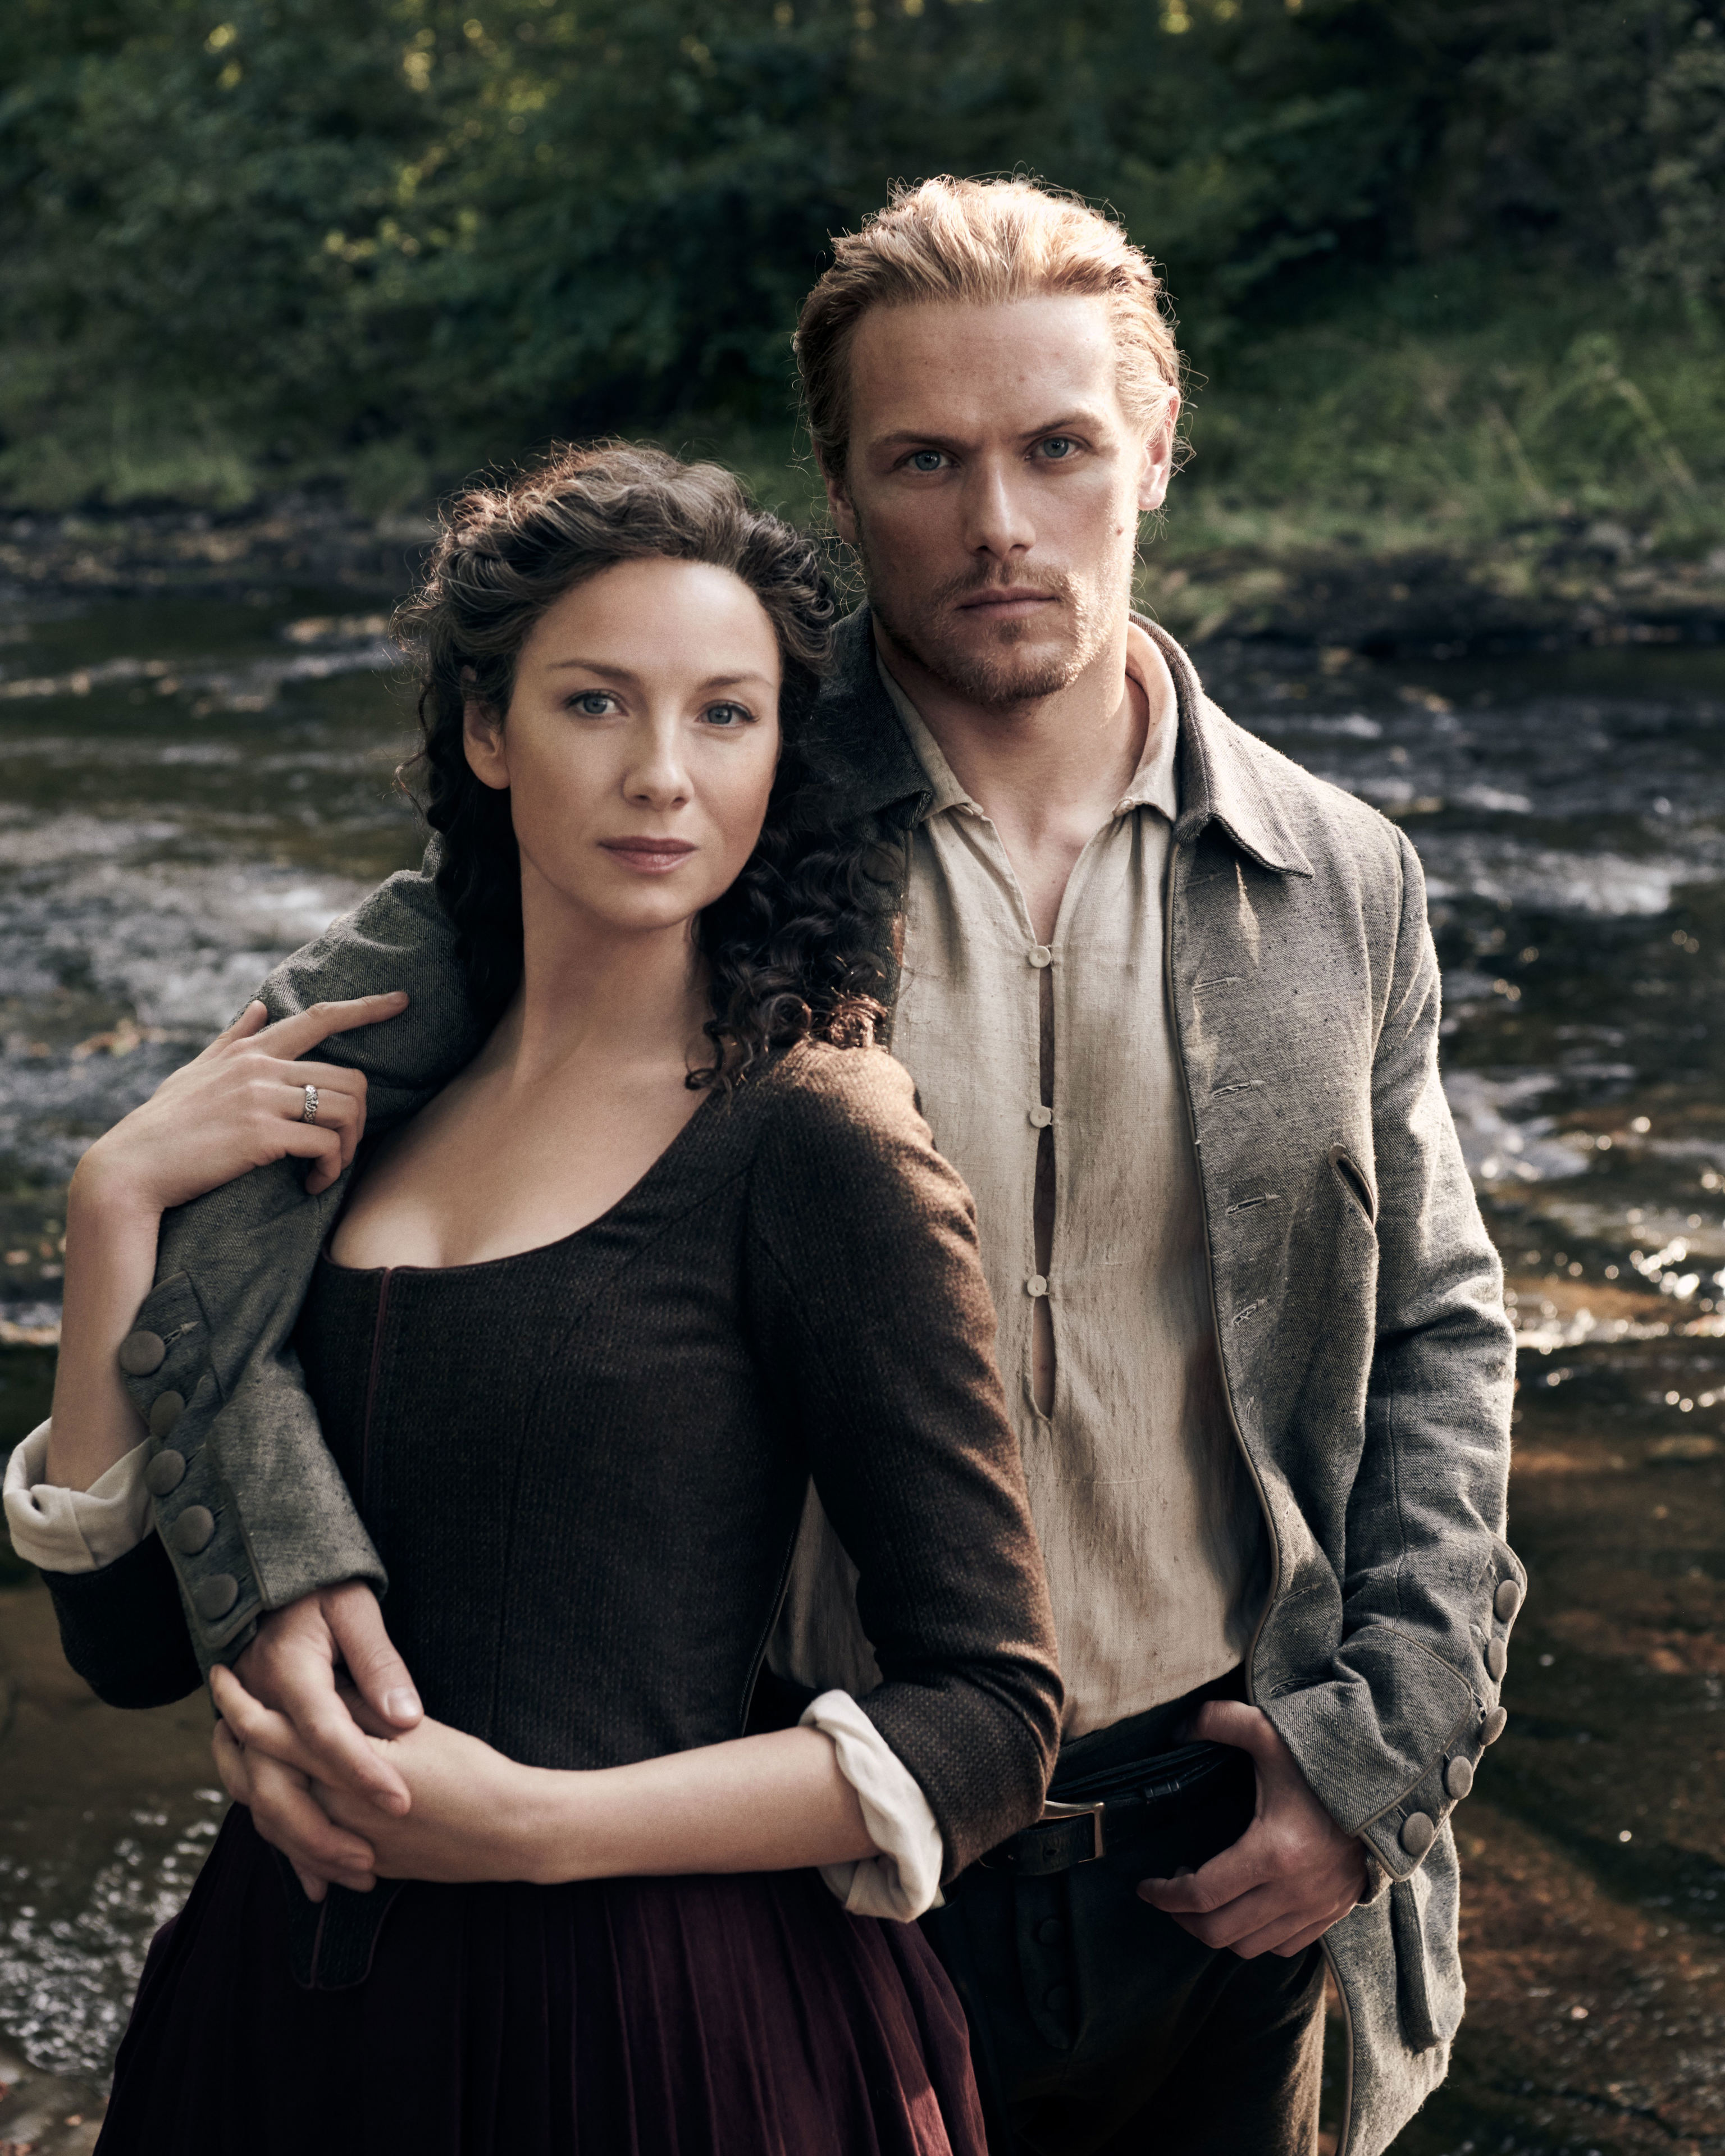 <p><span>"Outlander" -- the STARZ series based on Diana Gabaldon's bestselling book series -- kicks off as English military nurse-turned-surgeon Claire Randall (played by Caitriona Balfe) mysteriously disappears from her life and husband in post-World War II 1946 upon touching ancient standing stones, only to reappear in Scotland in 1743. While there, Claire is forced to marry warrior Jamie Fraser (played by Sam Heughan) for protection, but ends up falling in love with him as they go on to endure unspeakable tragedies along with inspiring triumphs. So far, this action-packed romantic fantasy-historical drama, which is now set in pre-Revolutionary War America following a few more time-traveling adventures, has left us with our knickers in a serious twist. Season 7 debuted in 2023 -- and an eighth and final season is in the works.</span></p>